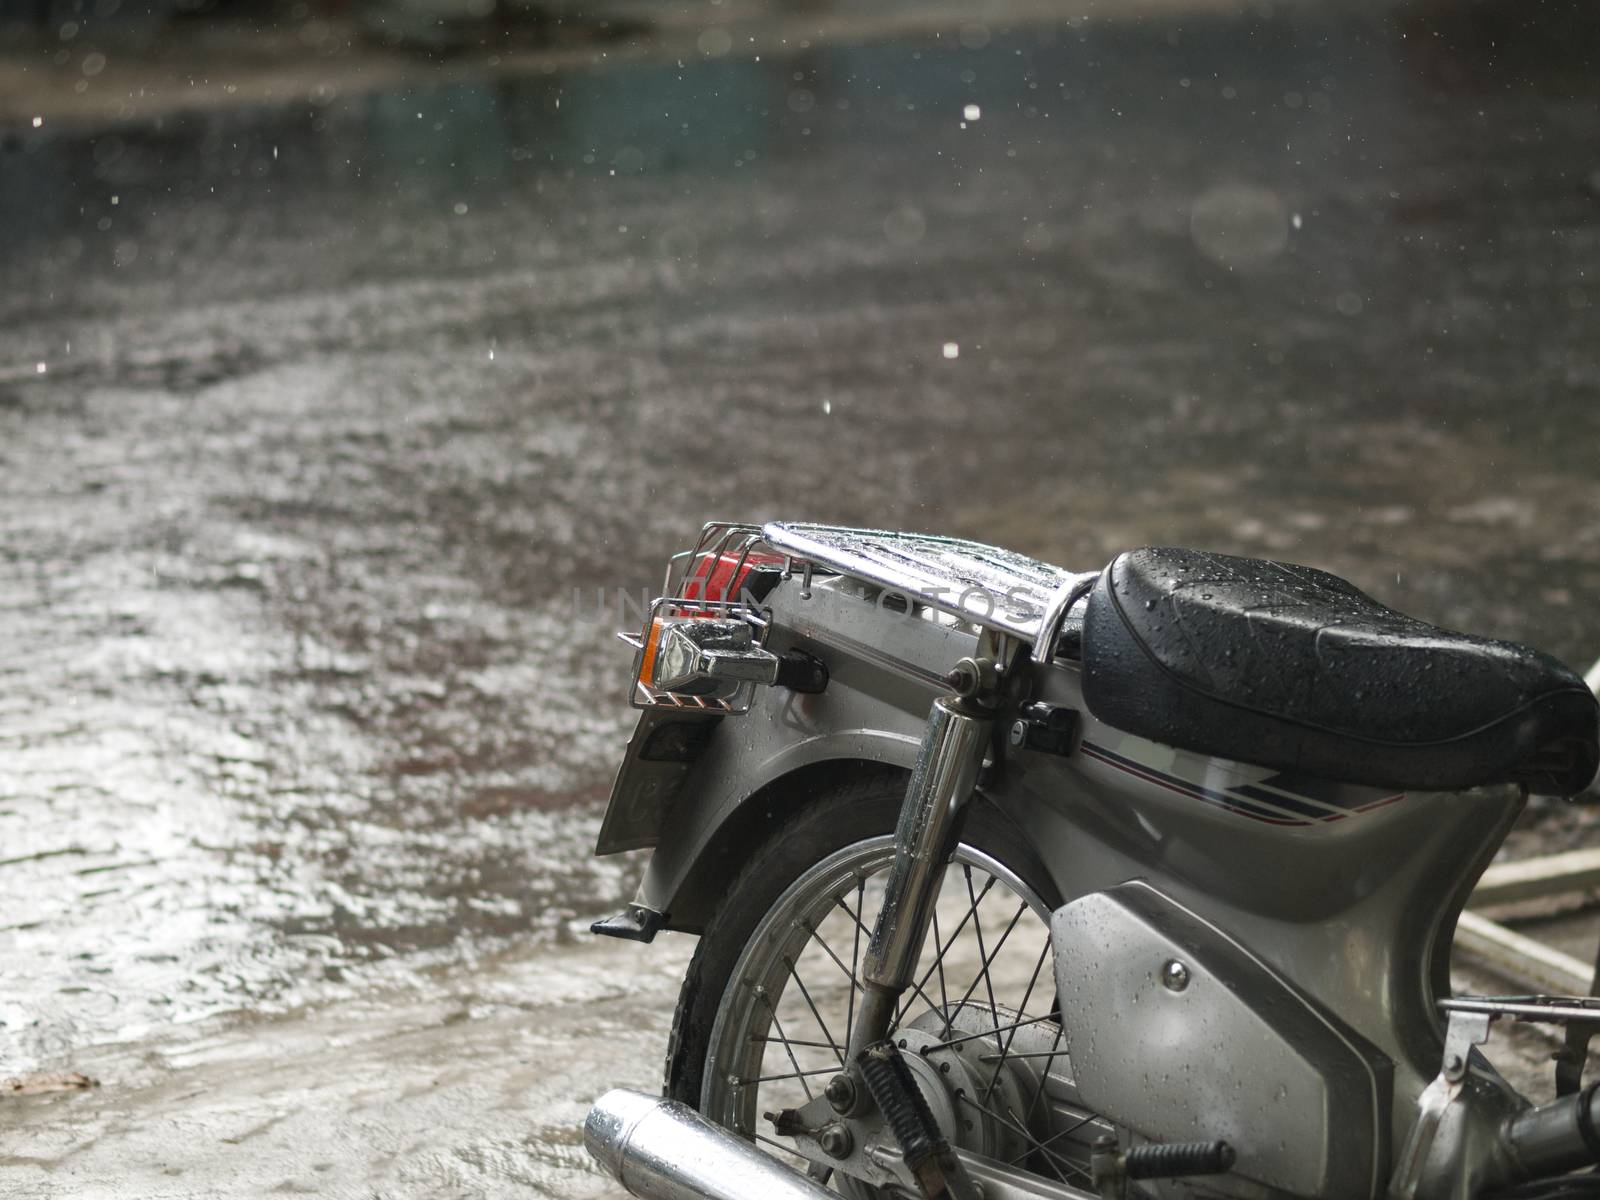 COLOR PHOTO OF MOTORCYCLE AND CLOSE-UP OF RAINDROPS